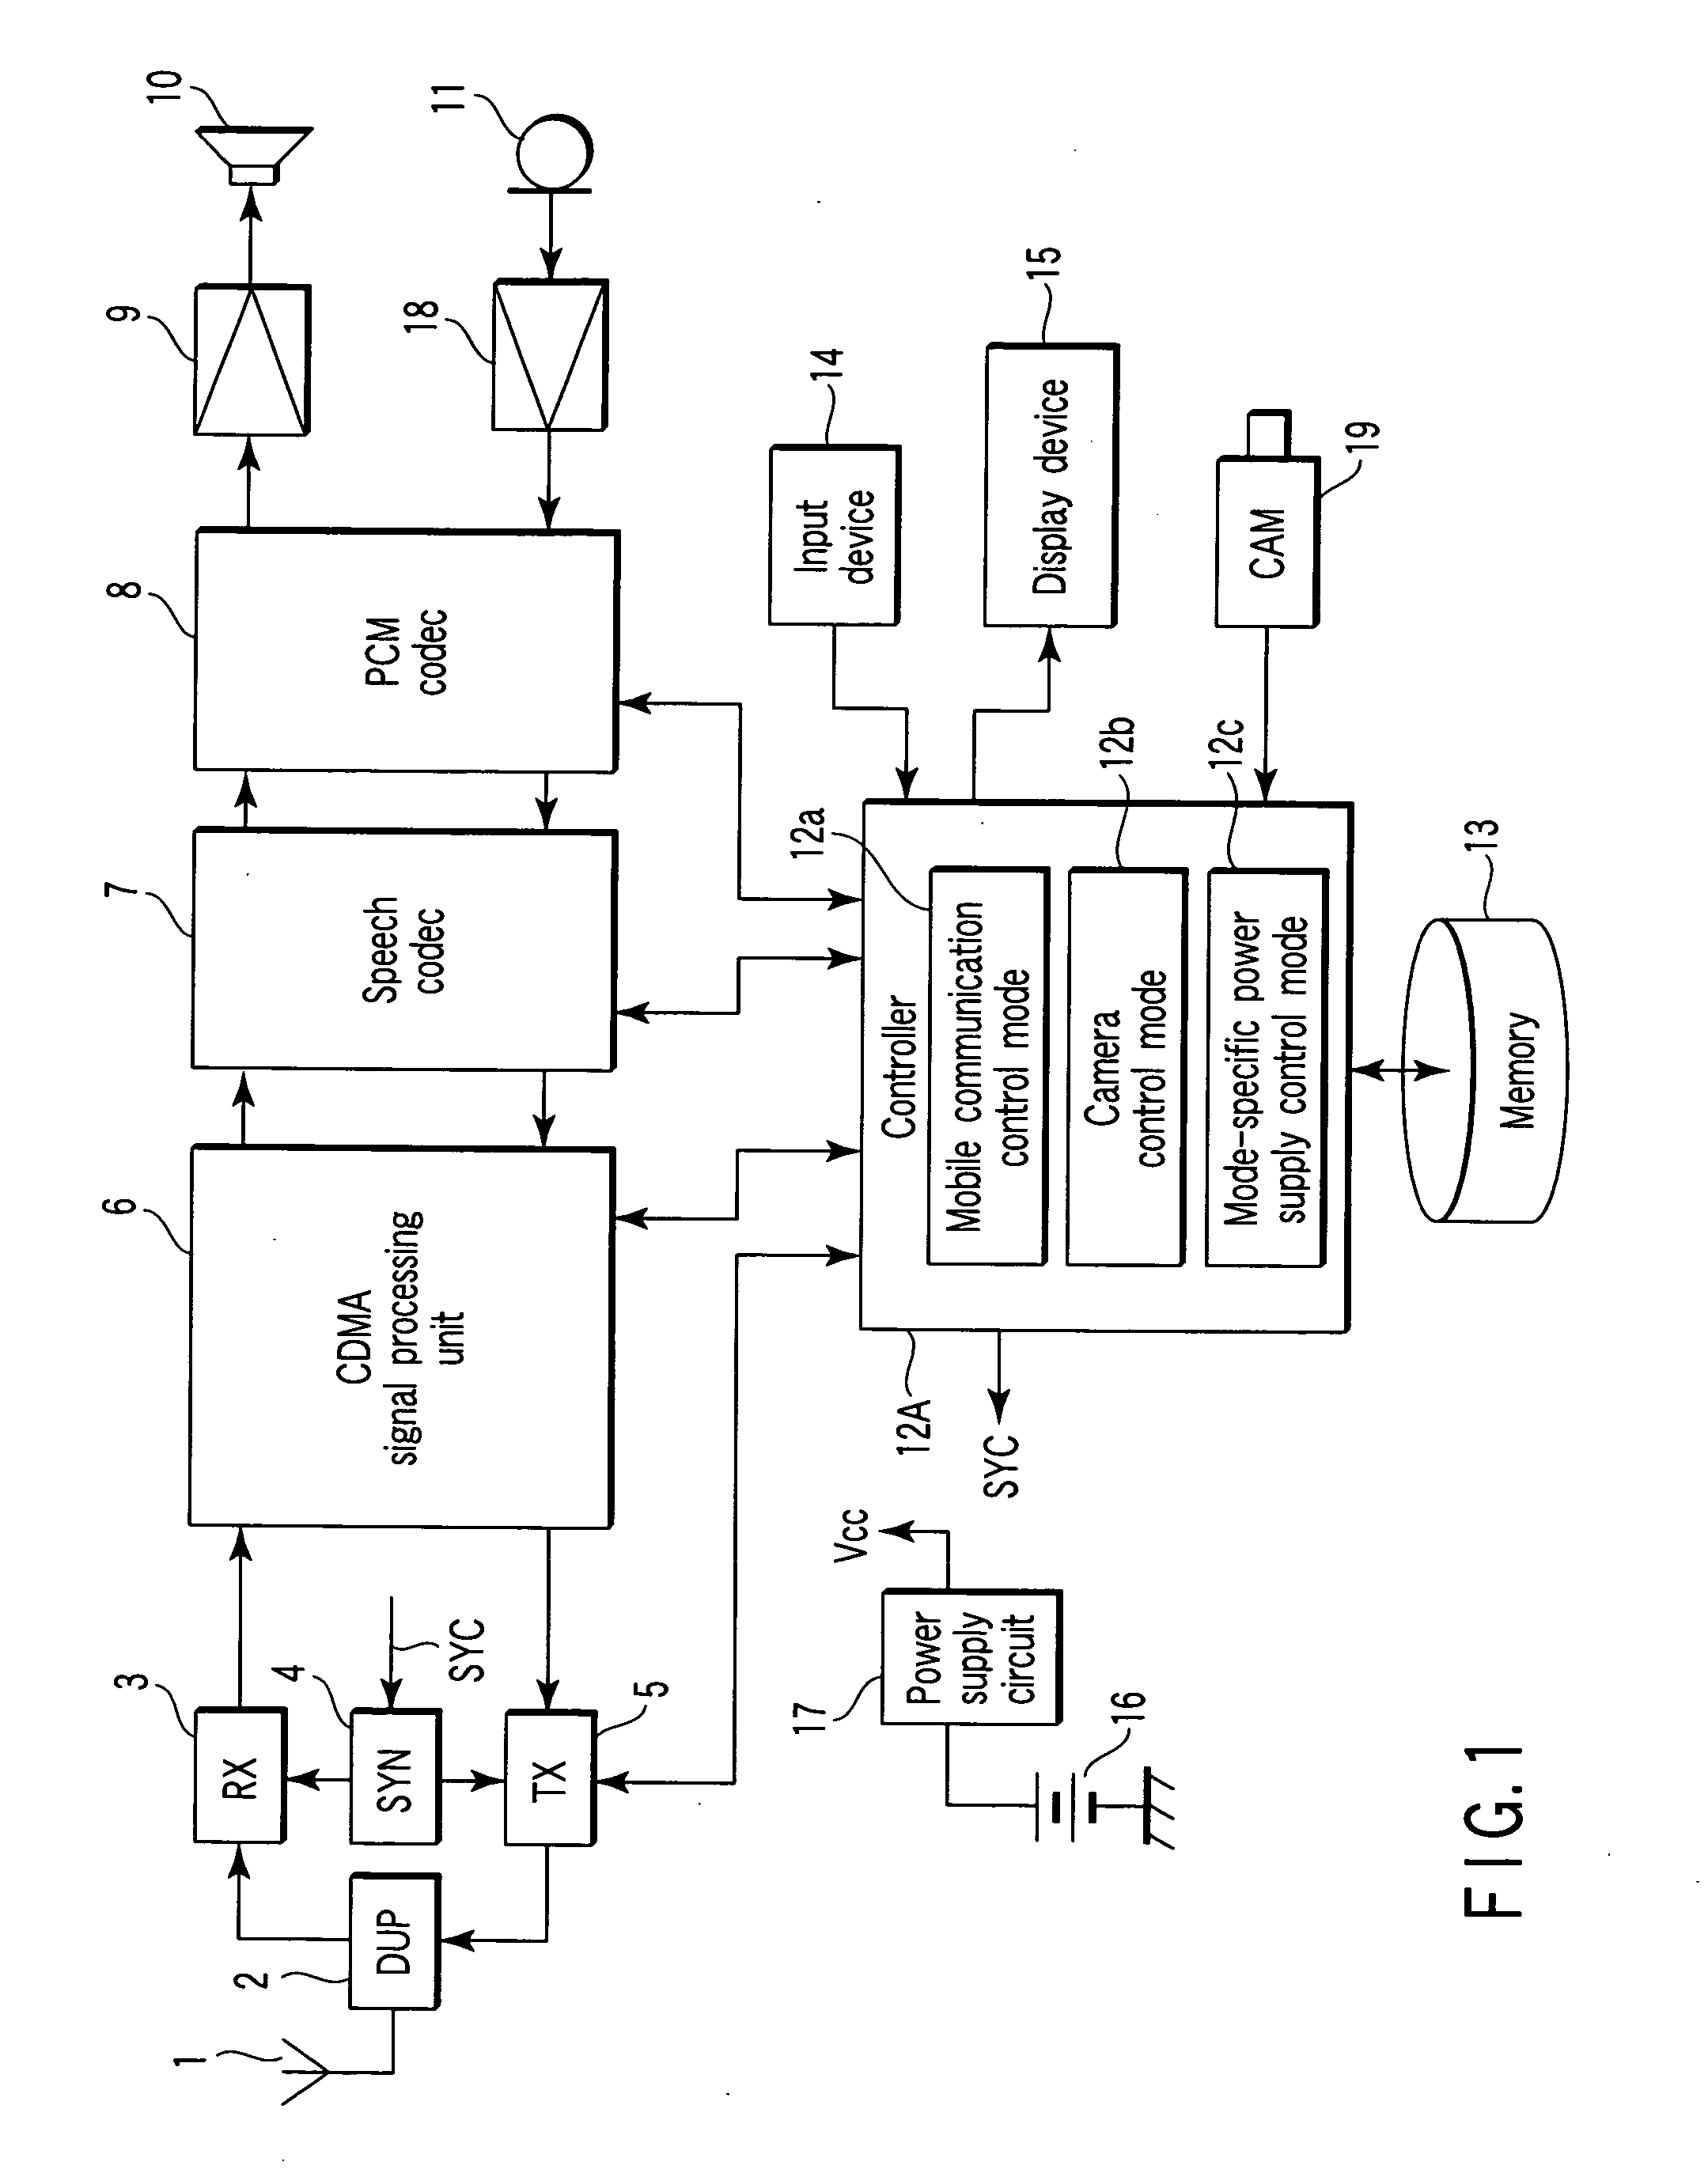 Mobile communication terminal having plurality of operation modes